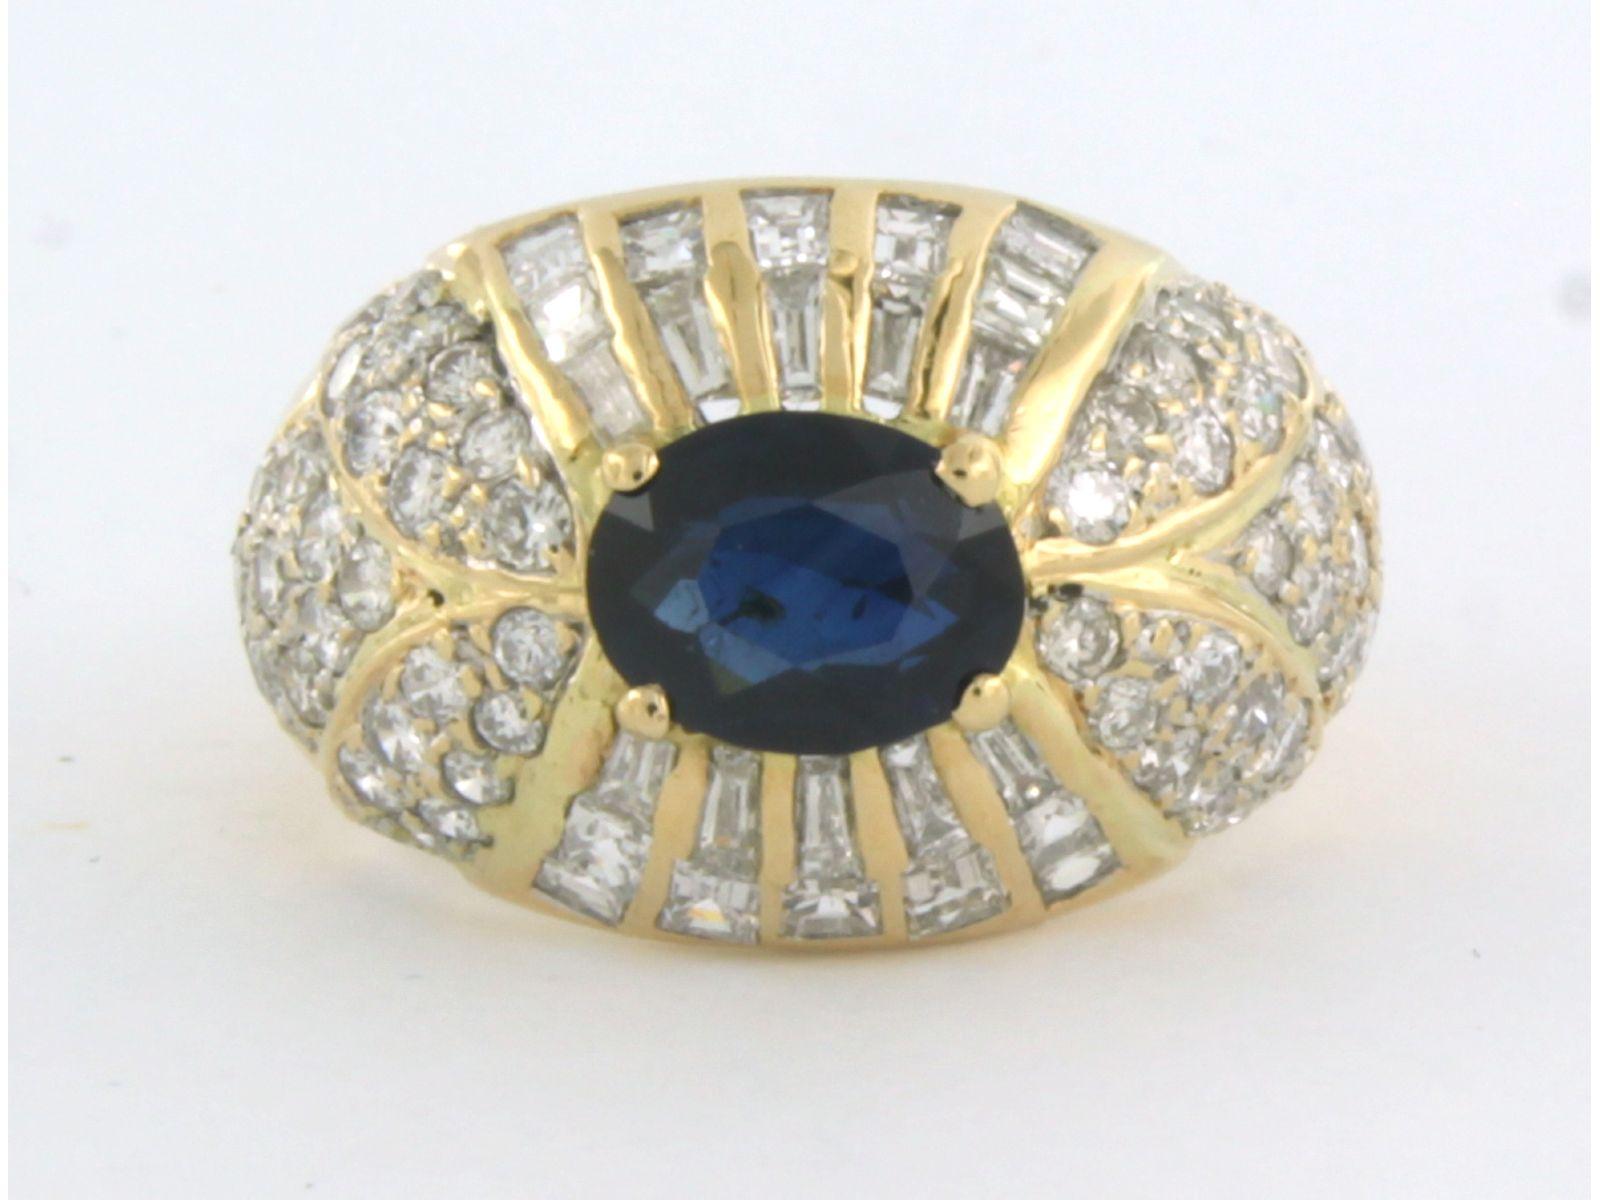 18k bicolour gold ring set with sapphire 1.40 ct and taper, square and brilliant cut diamonds up to. 2.20 ct - F/G - VS/SI - ring size U.S. 6.0 - EU. 16.5(52)

detailed description:

the top of the ring is 1.4 cm wide and 7.0 mm high

ring size U.S.